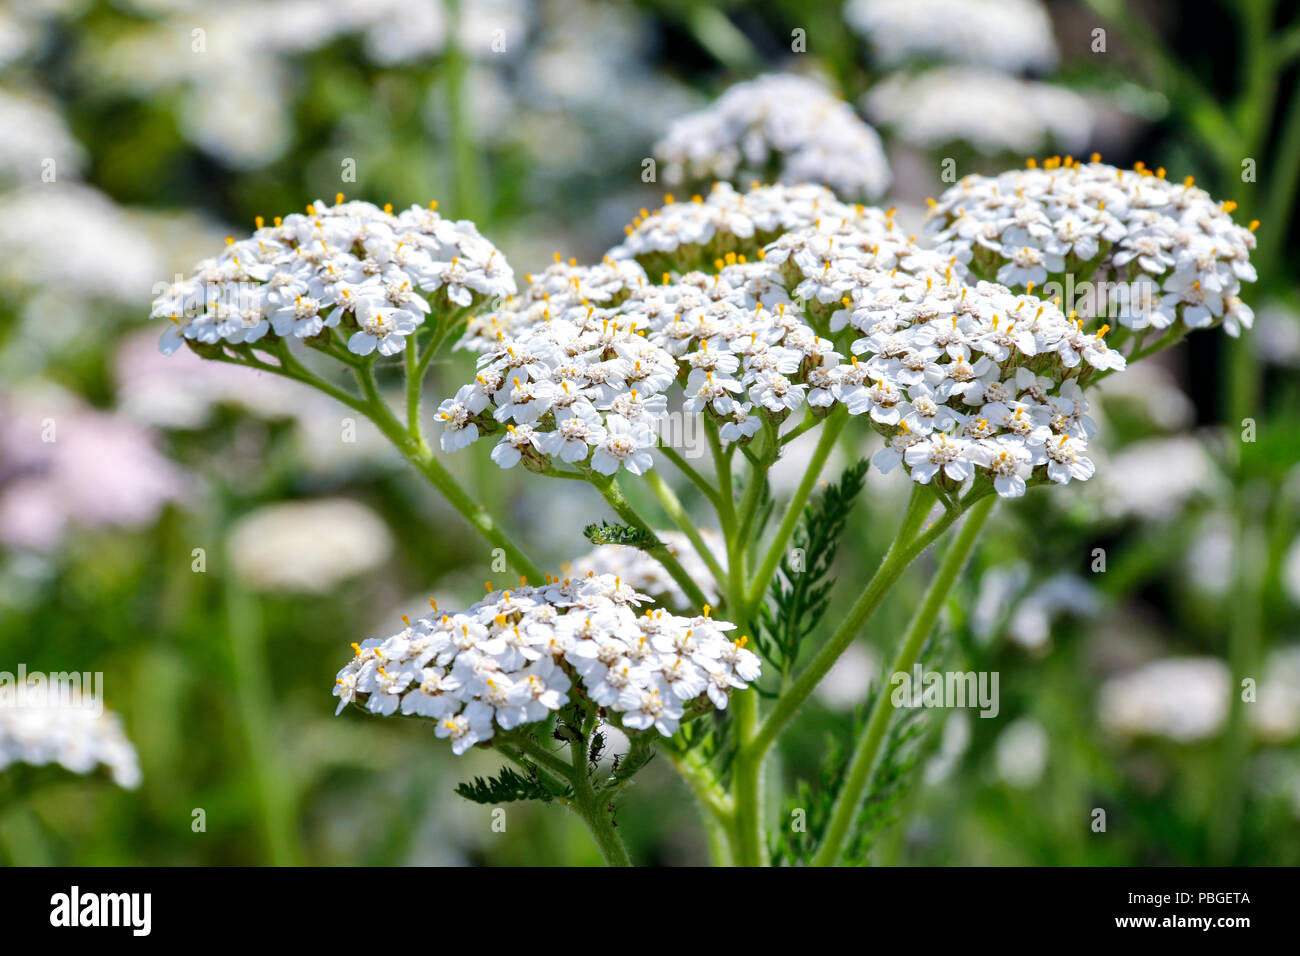 Flowers of Yarrow (Achillea Millefolium), a medicinal herb traditionally used for its anti-inflammatory properties Stock Photo